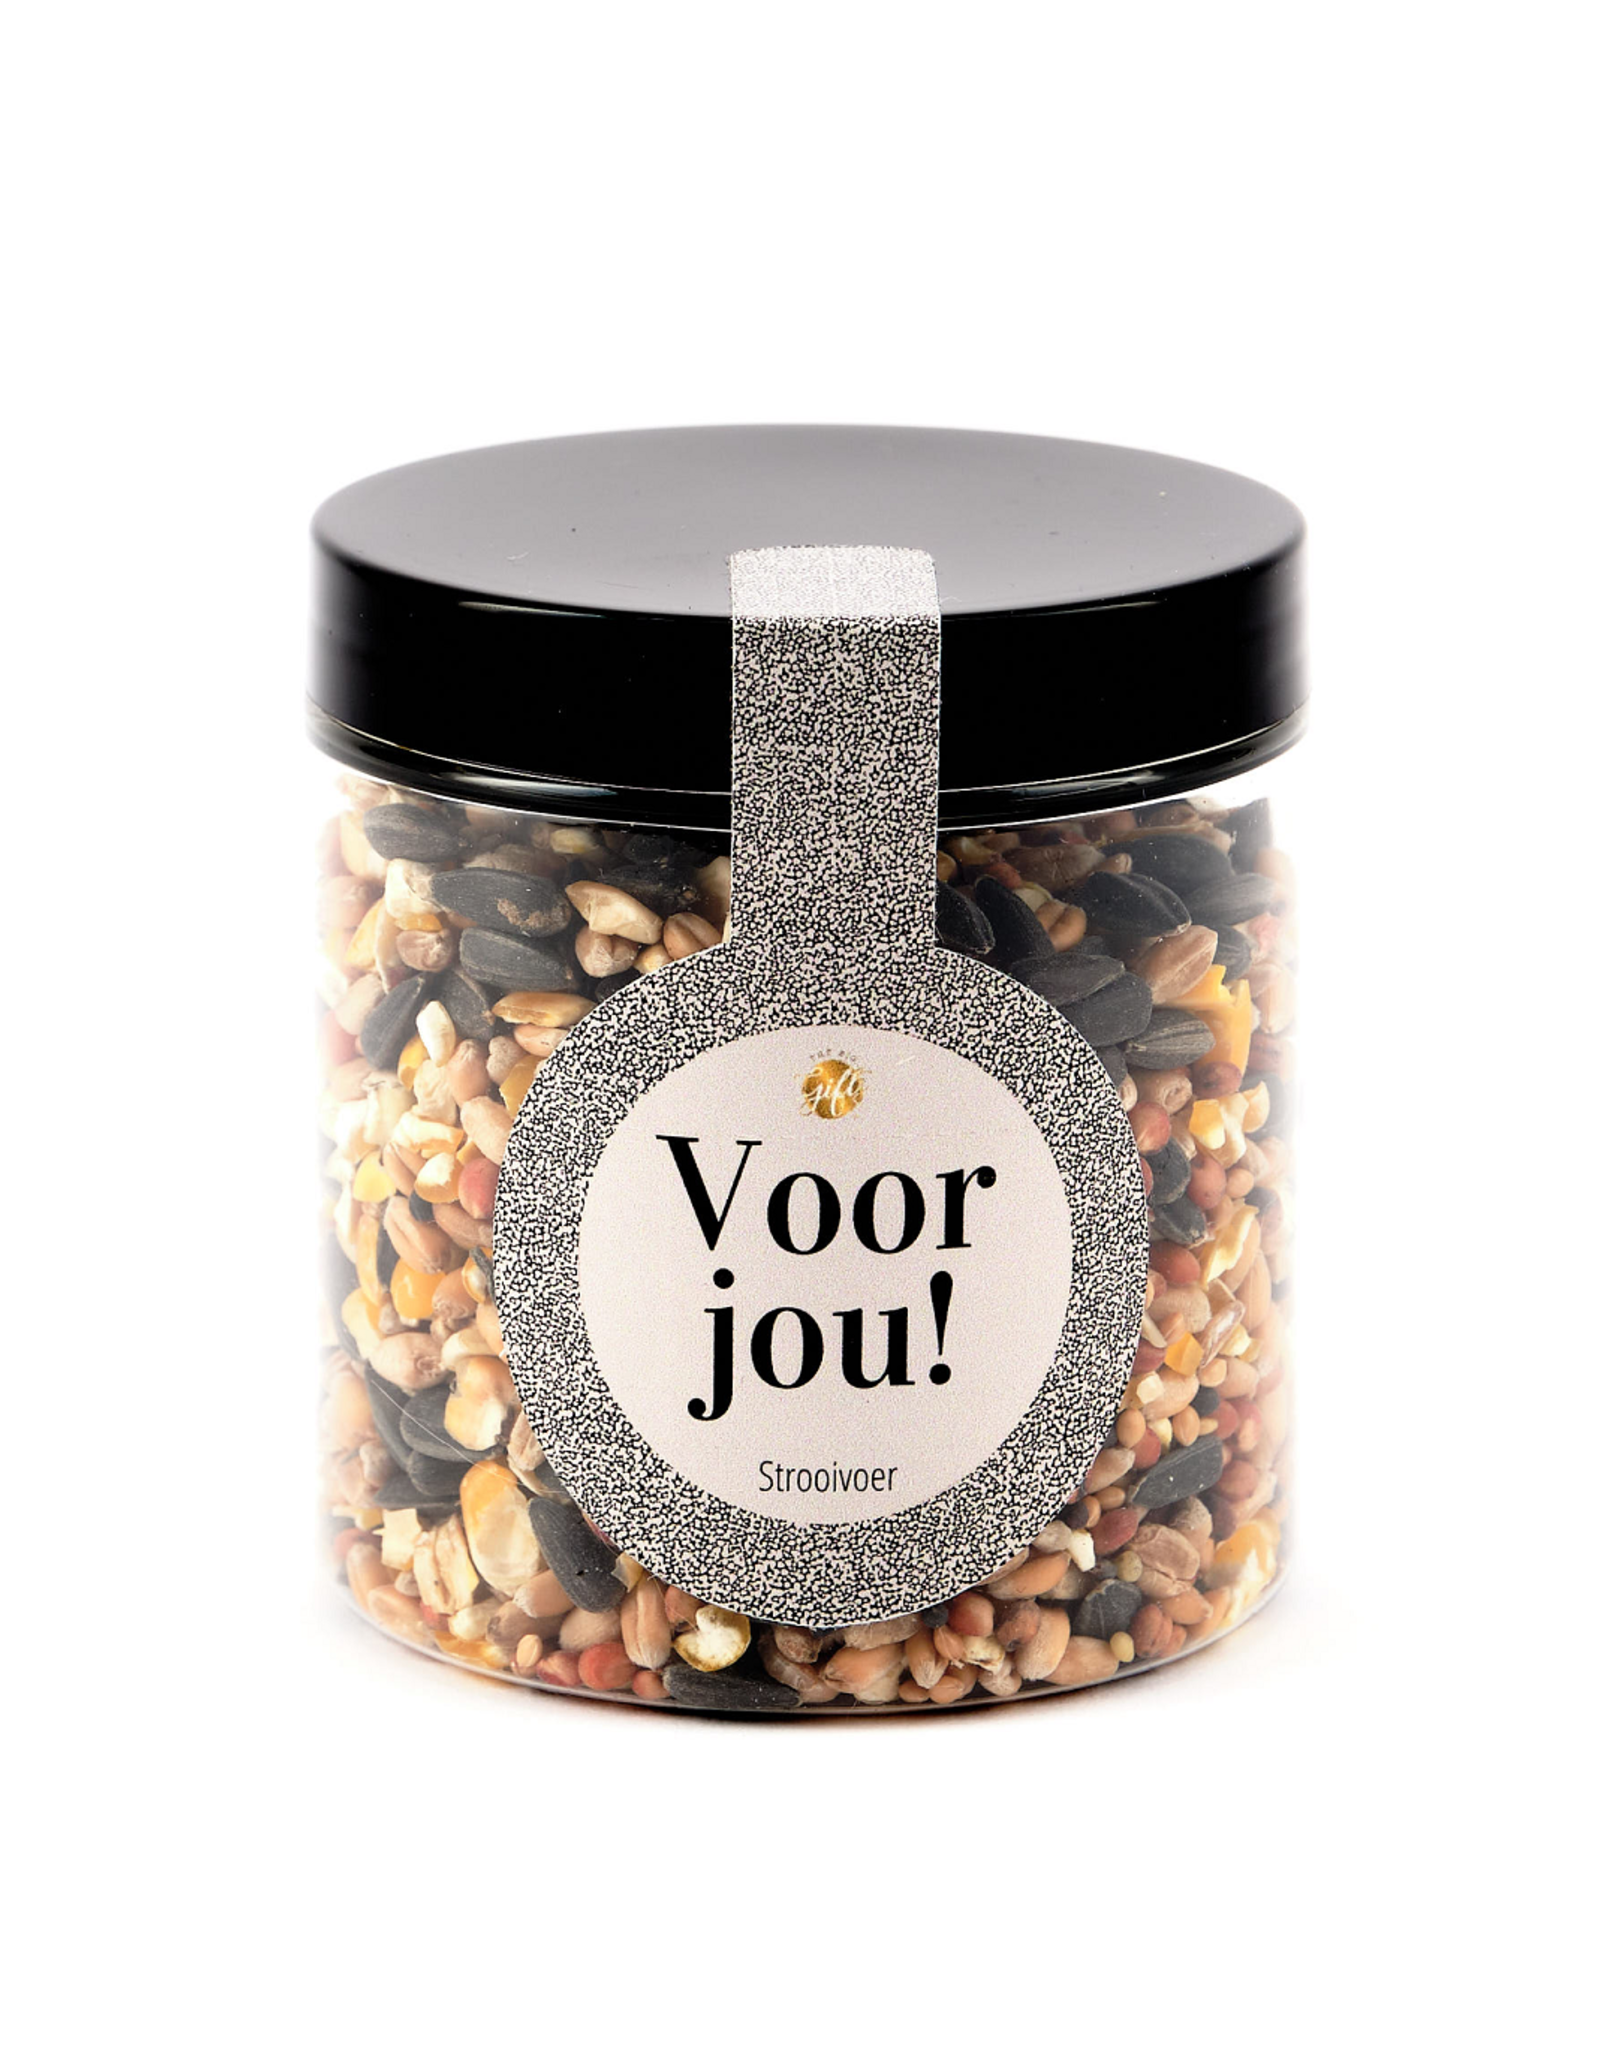 The Big Gifts Strooivoer "Voor Jou!" - The Big Gifts